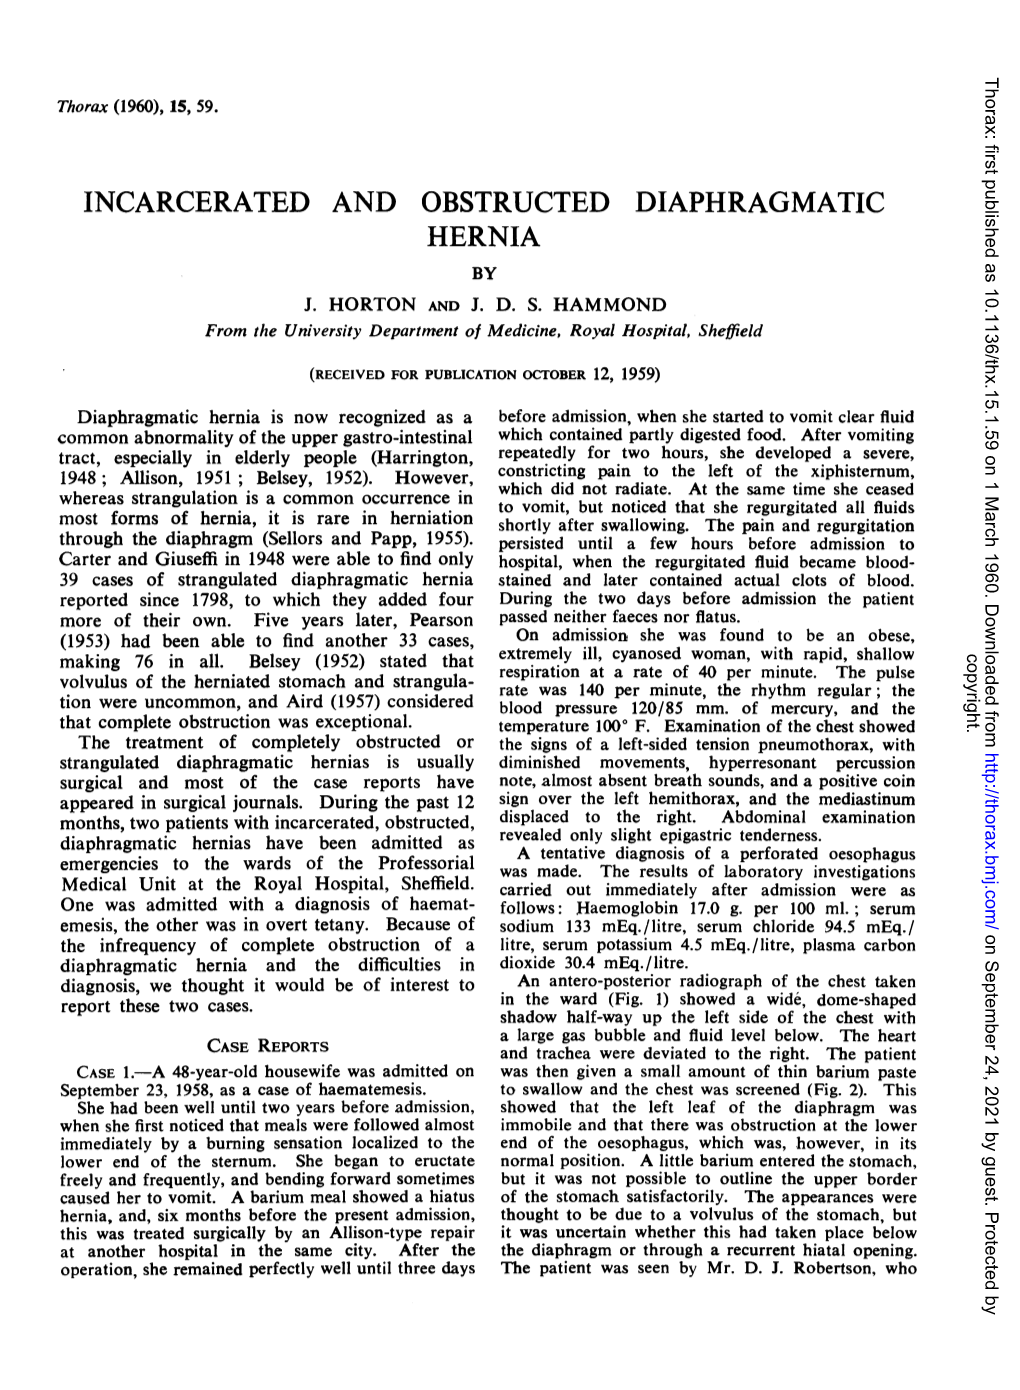 Incarcerated and Obstructed Diaphragmatic Hernia by J